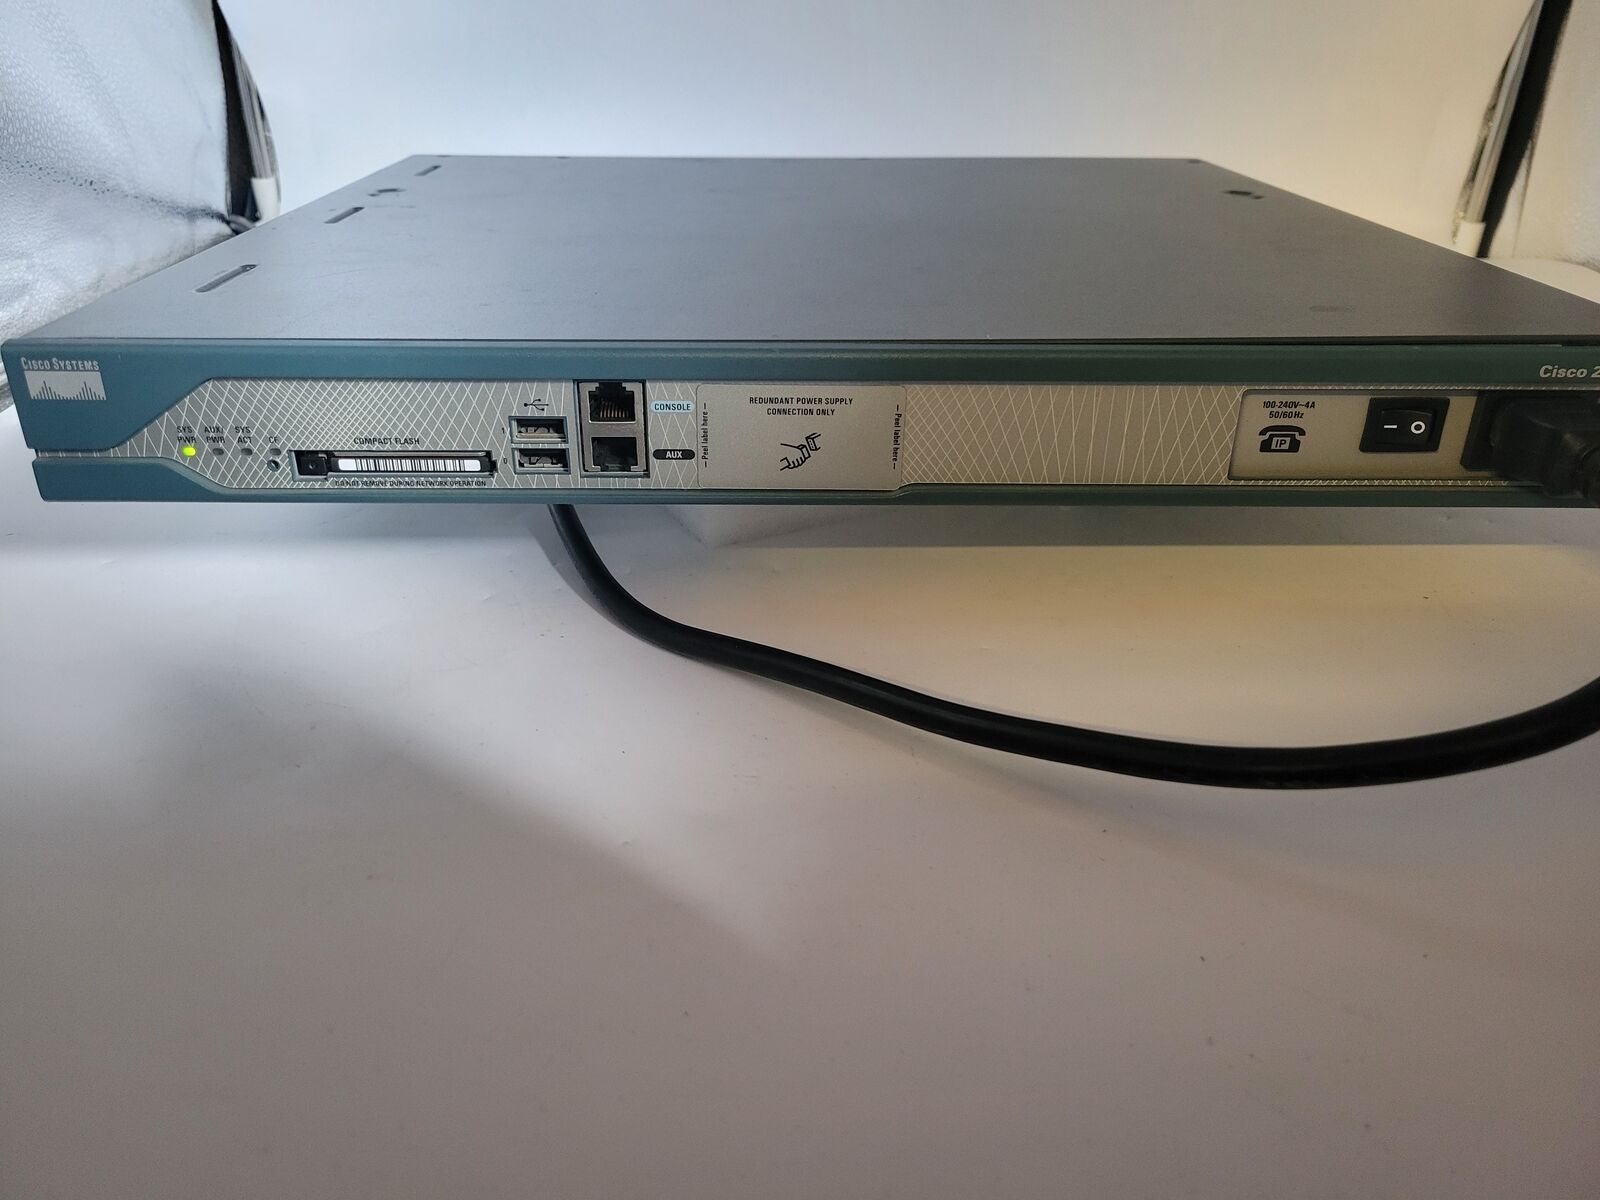 Cisco CISCO2811 2811 Integrated Services Router - USED